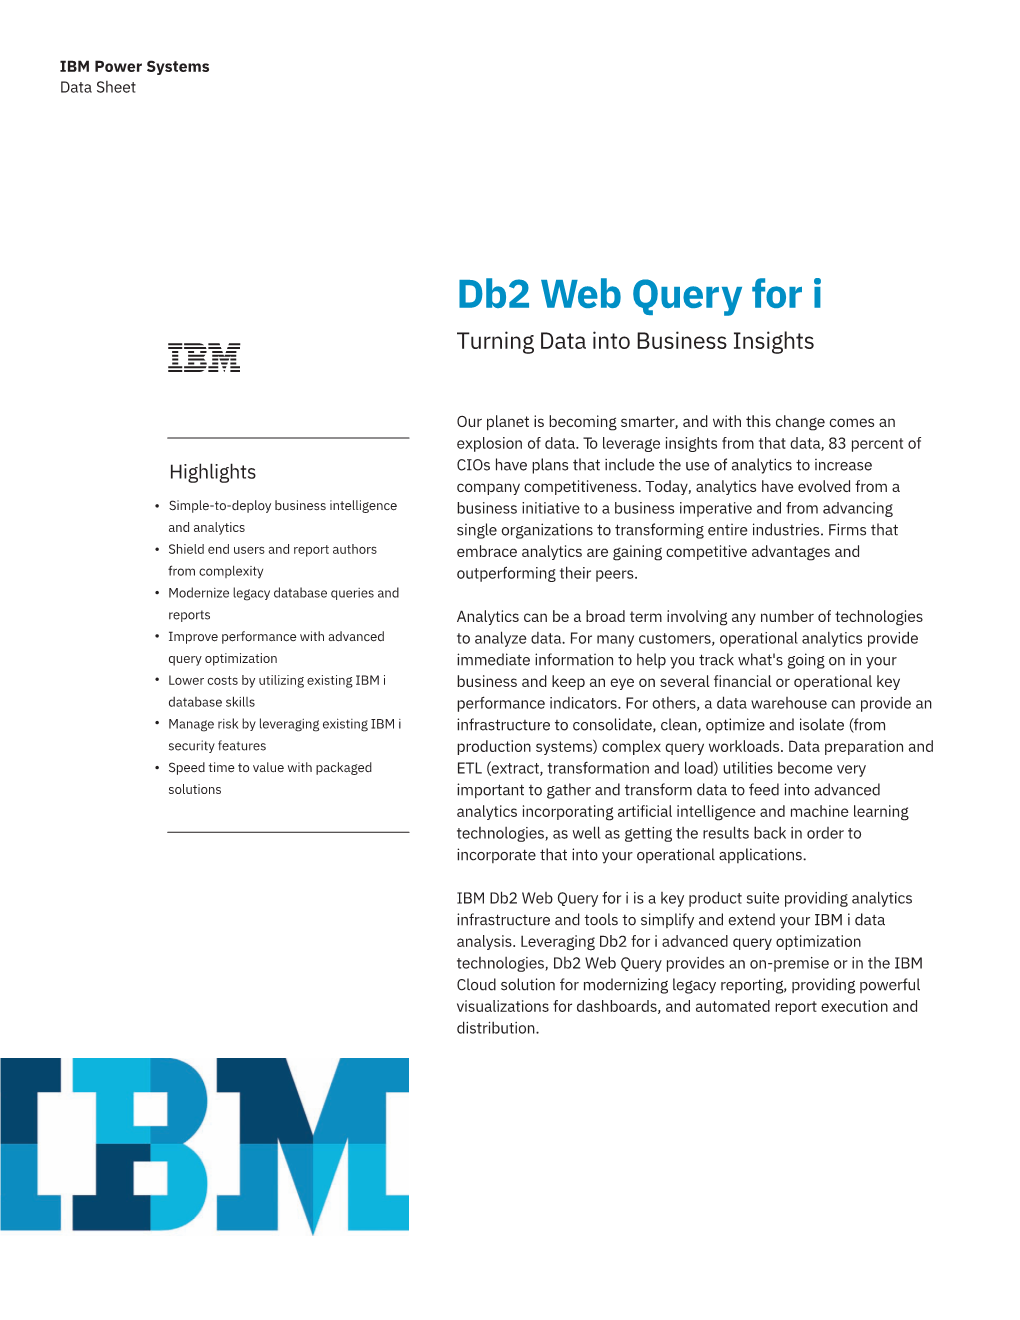 Db2 Web Query for I Turning Data Into Business Insights